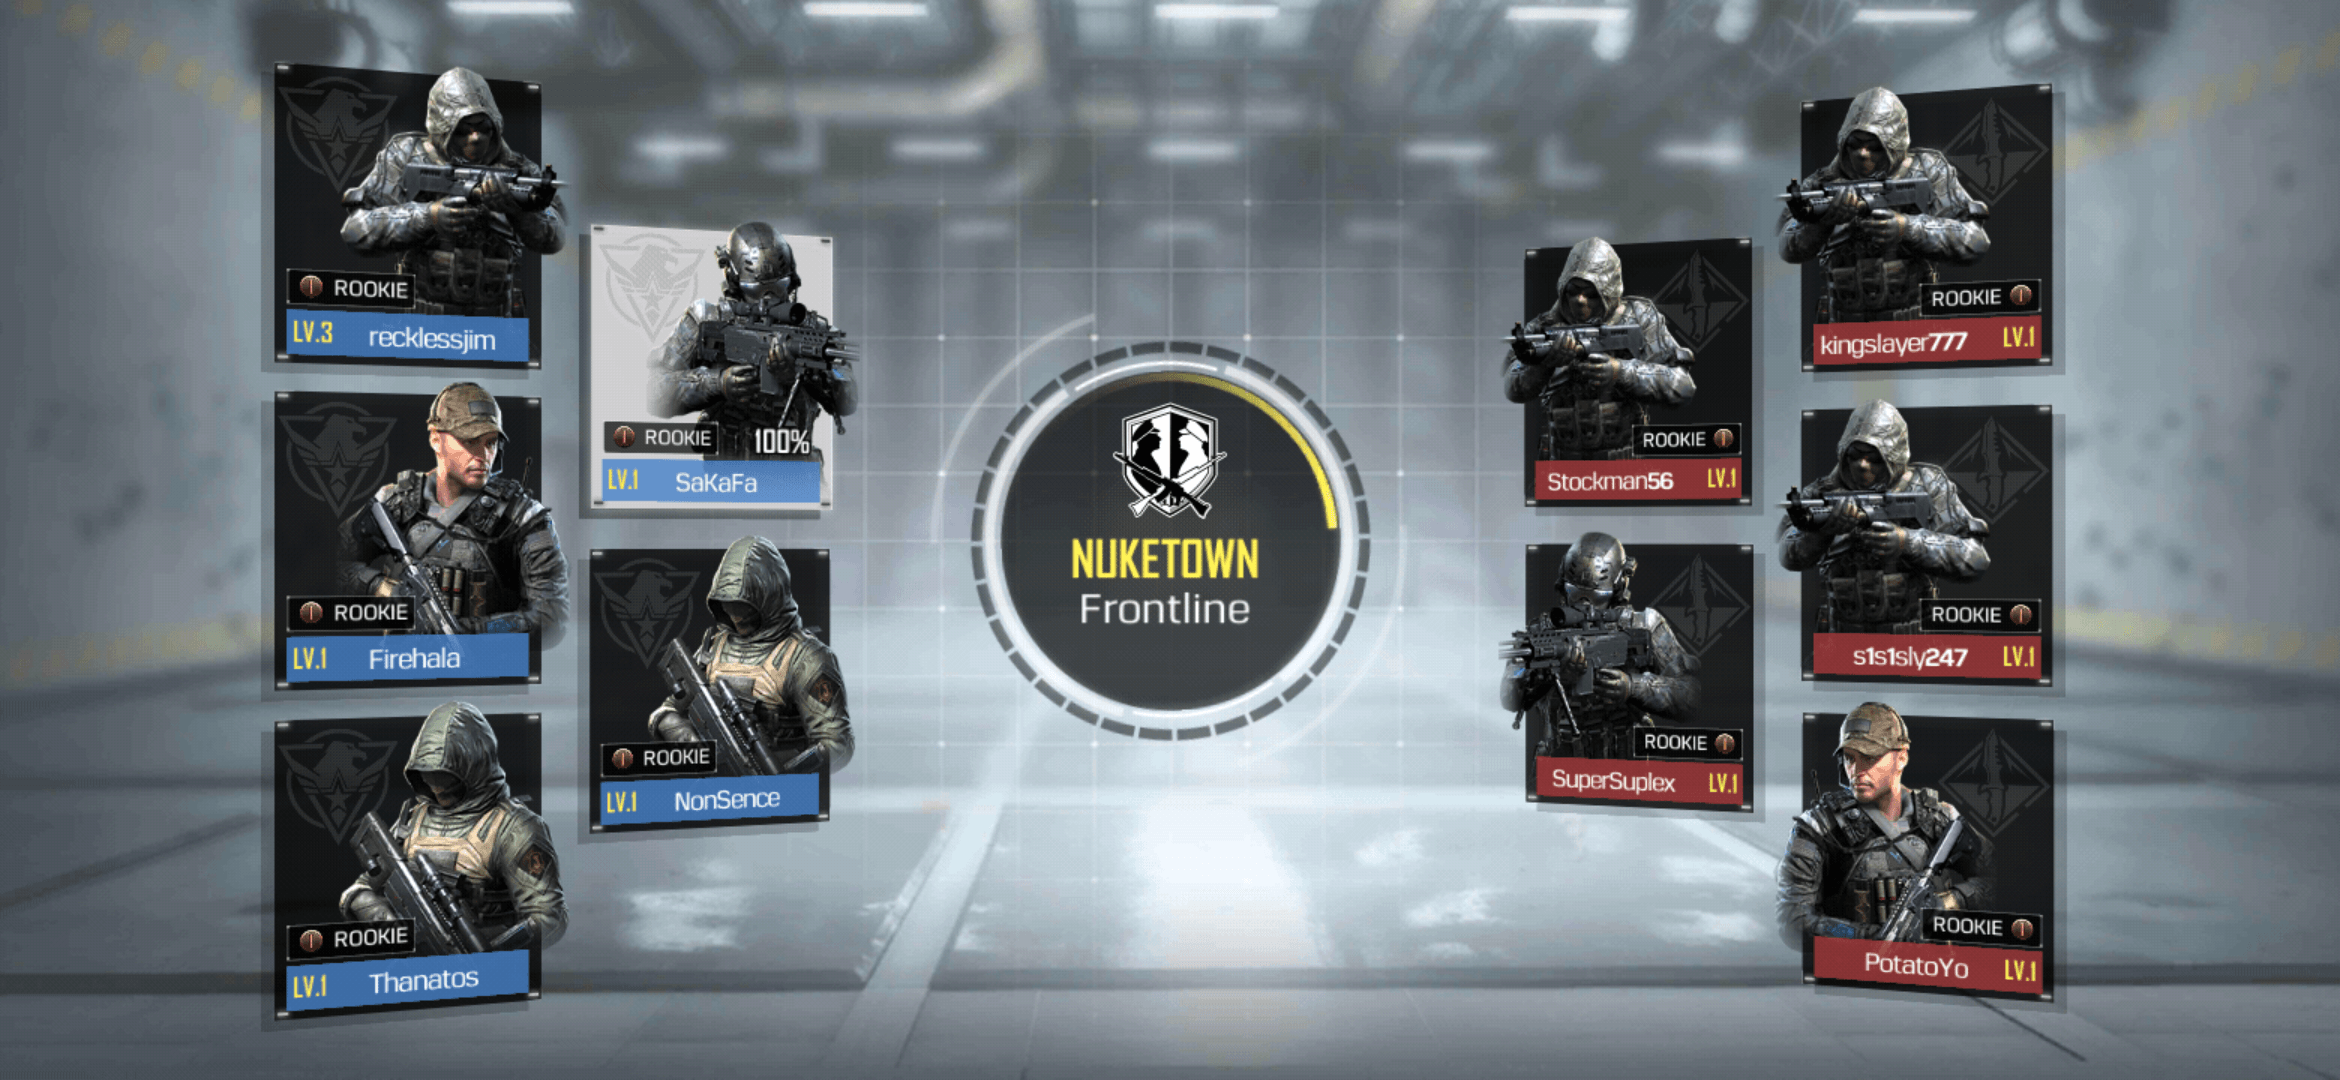 Call of Duty Mobile Update 1.0.3.4 Version Android Free Game Full APK Download 2019